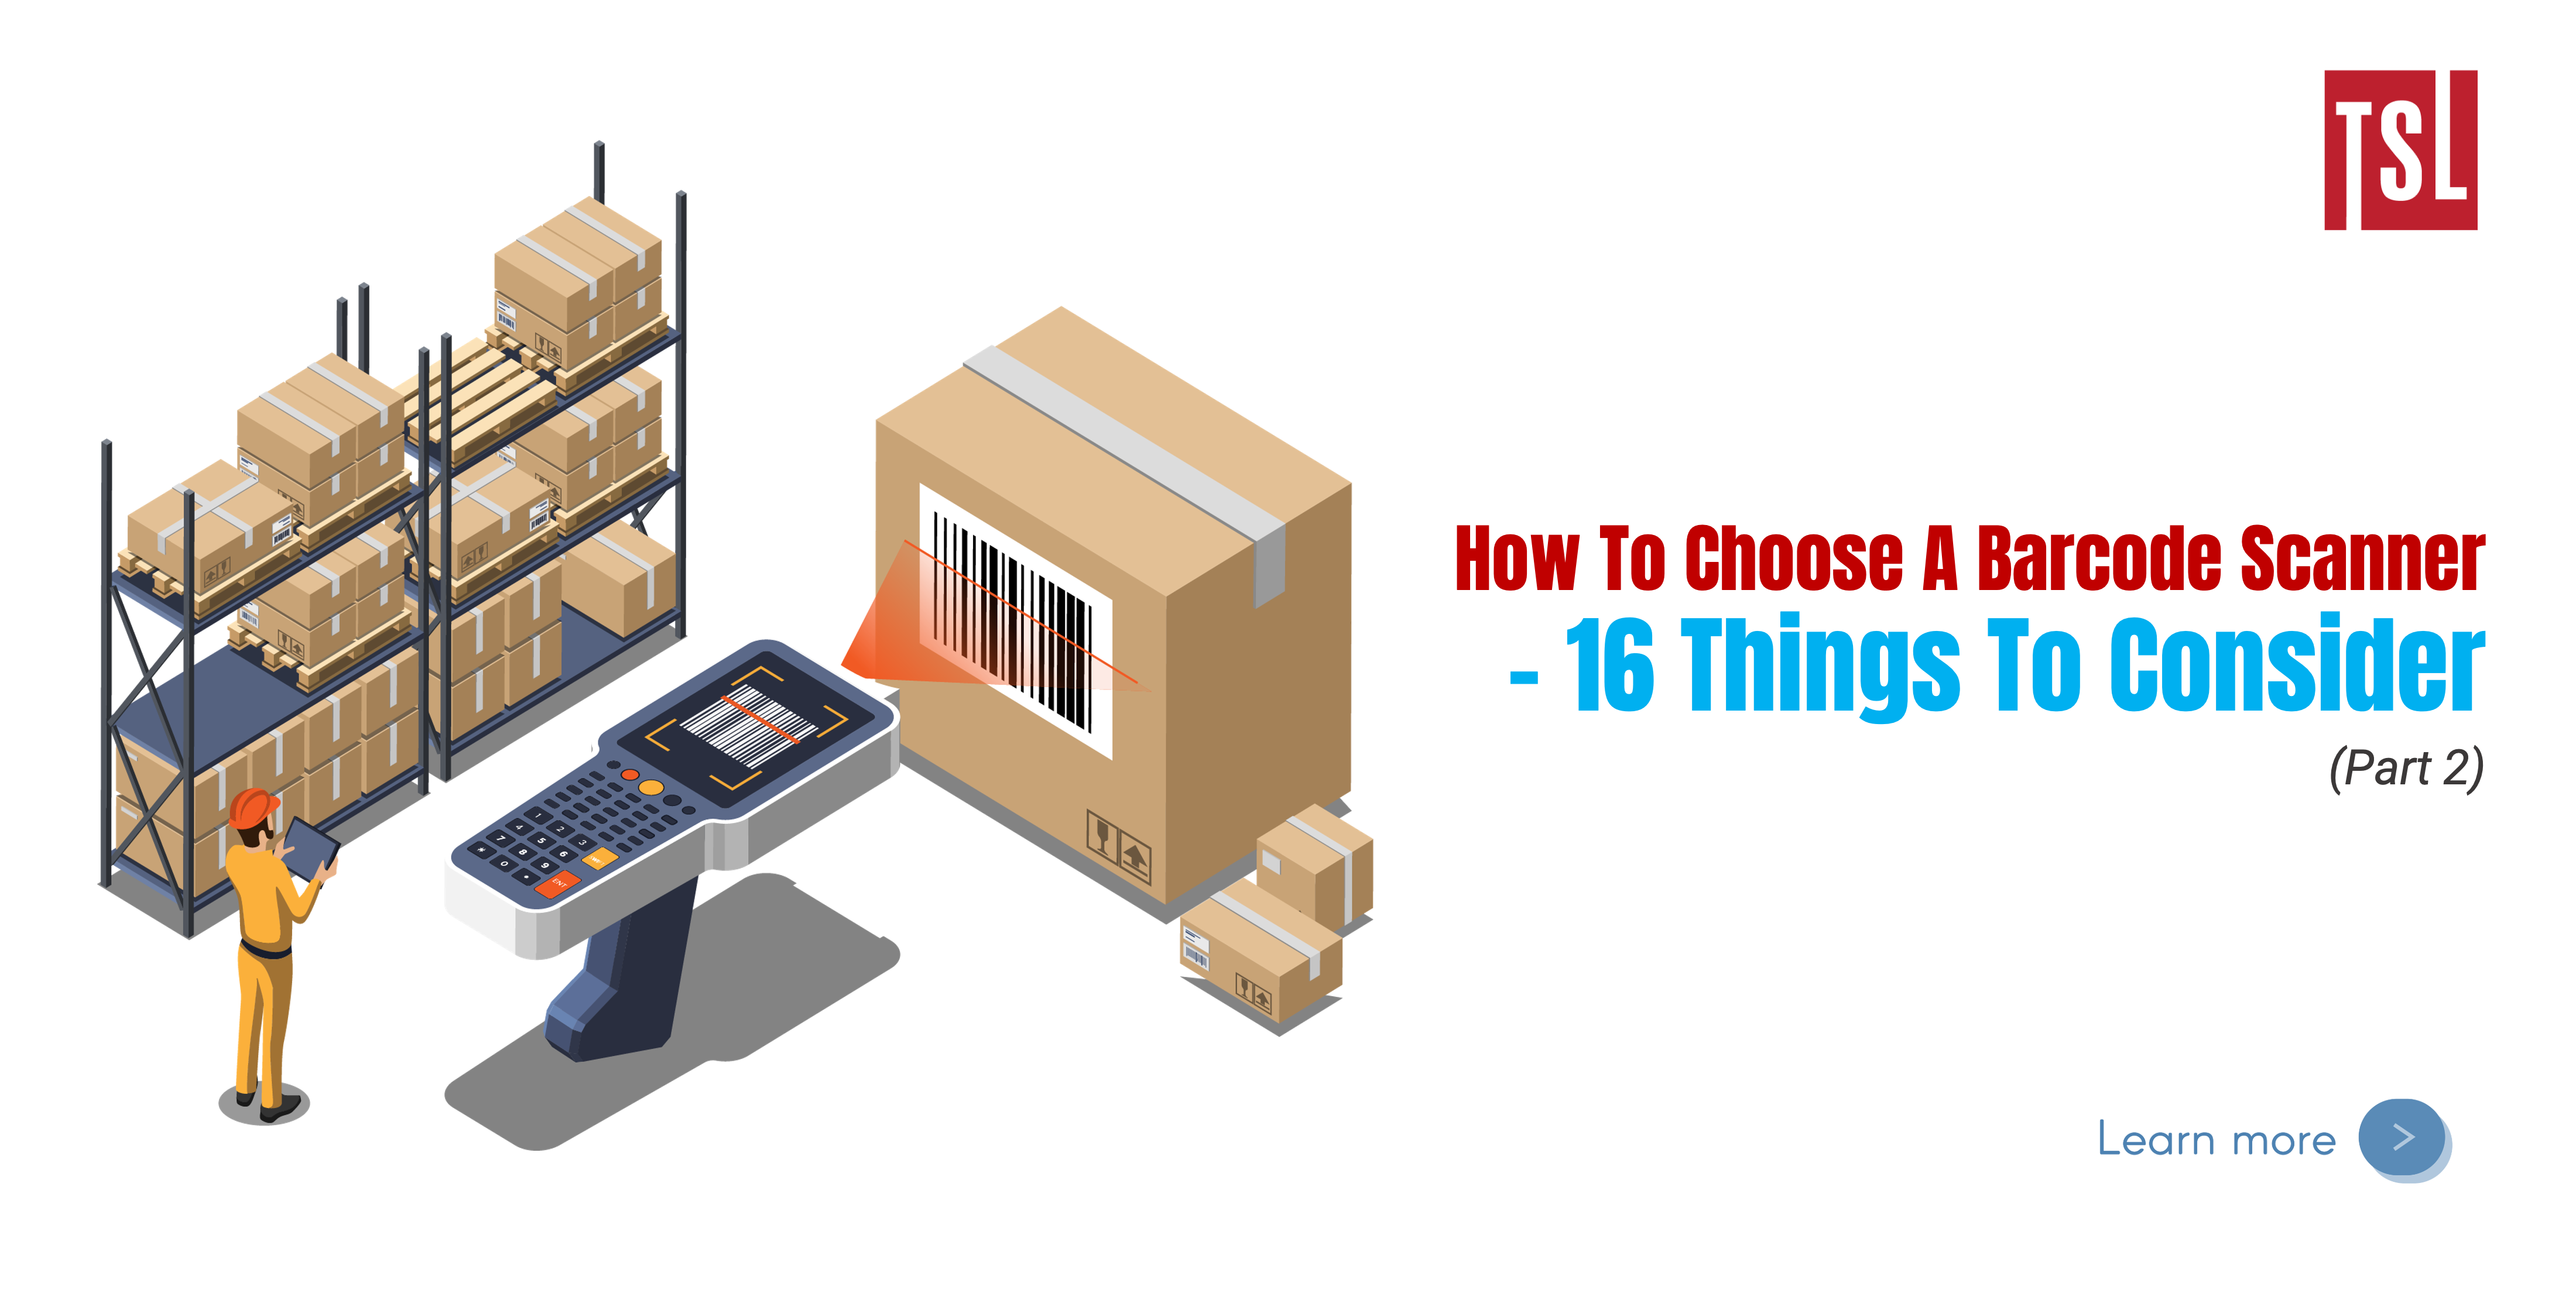 How To Choose A Barcode Scanner – 16 Things To Consider (Part 2)